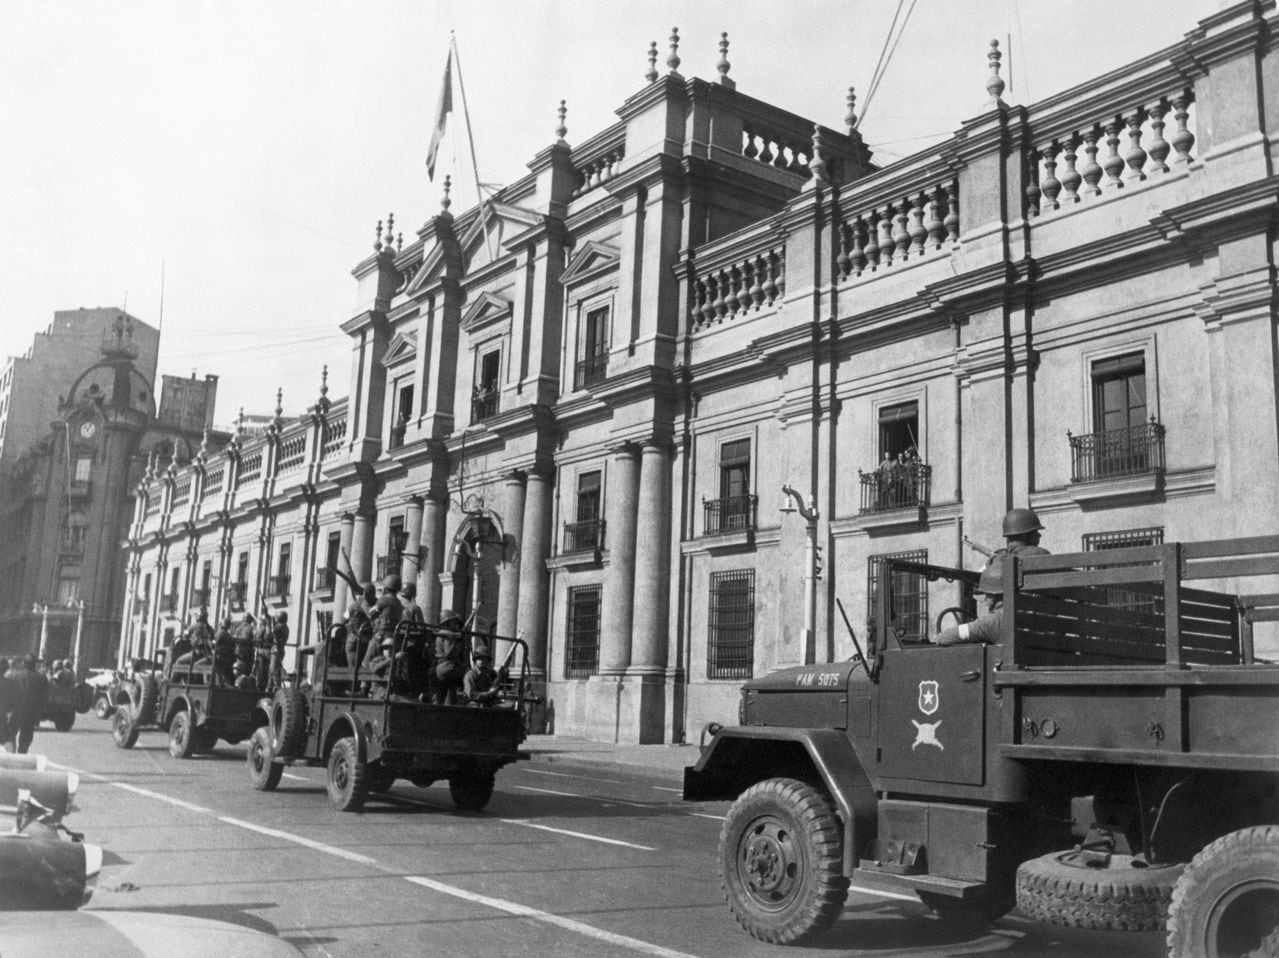 (Original Caption) 6/29/1973-Santiago, Chile- Troops loyal to President Salvador Allende are trucked to the Presidential Palace 6/29 to begin defense of the regime against rebel armored units.